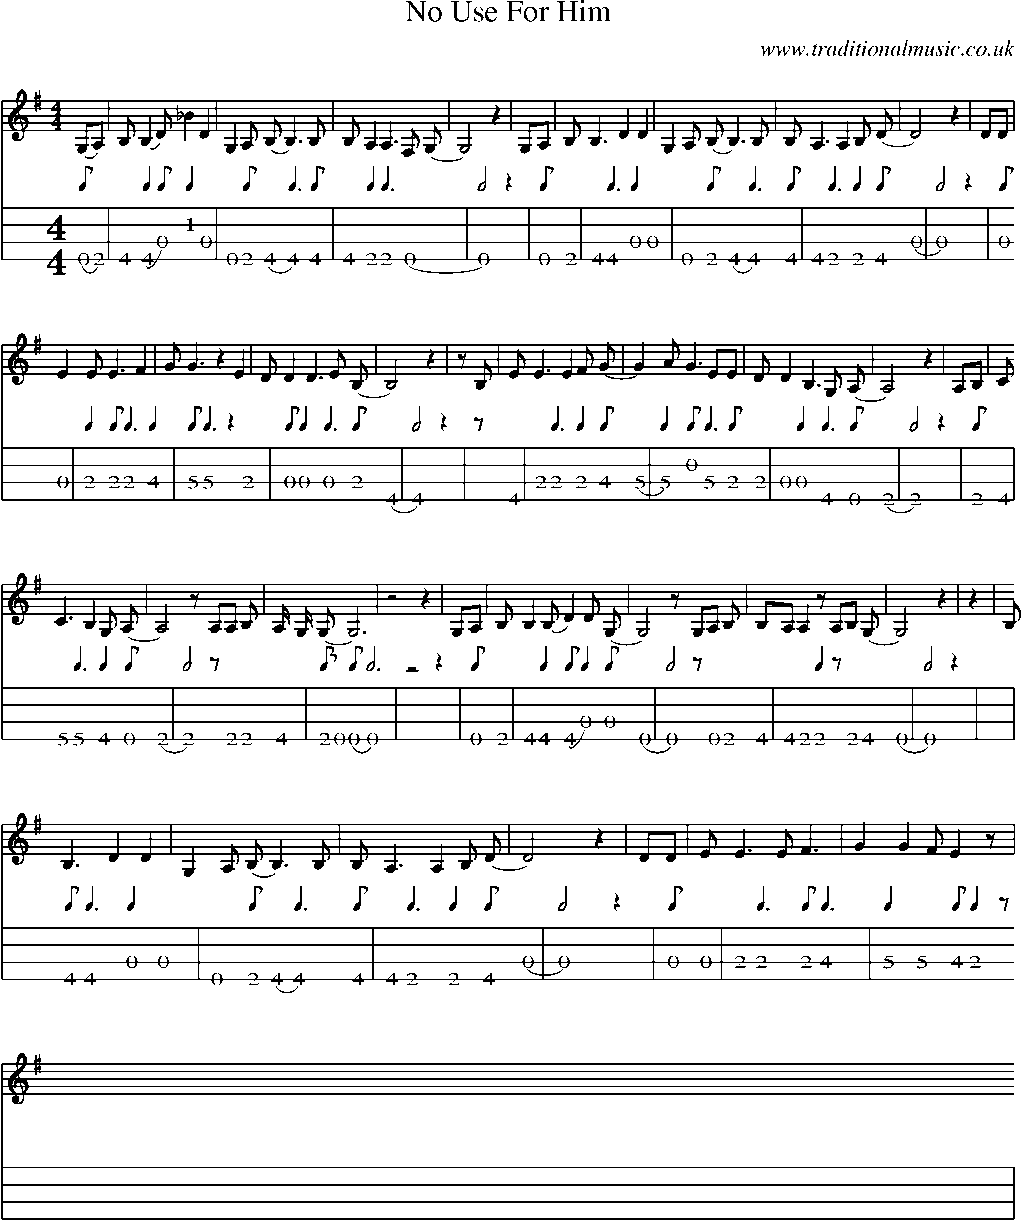 Mandolin Tab and Sheet Music for No Use For Him